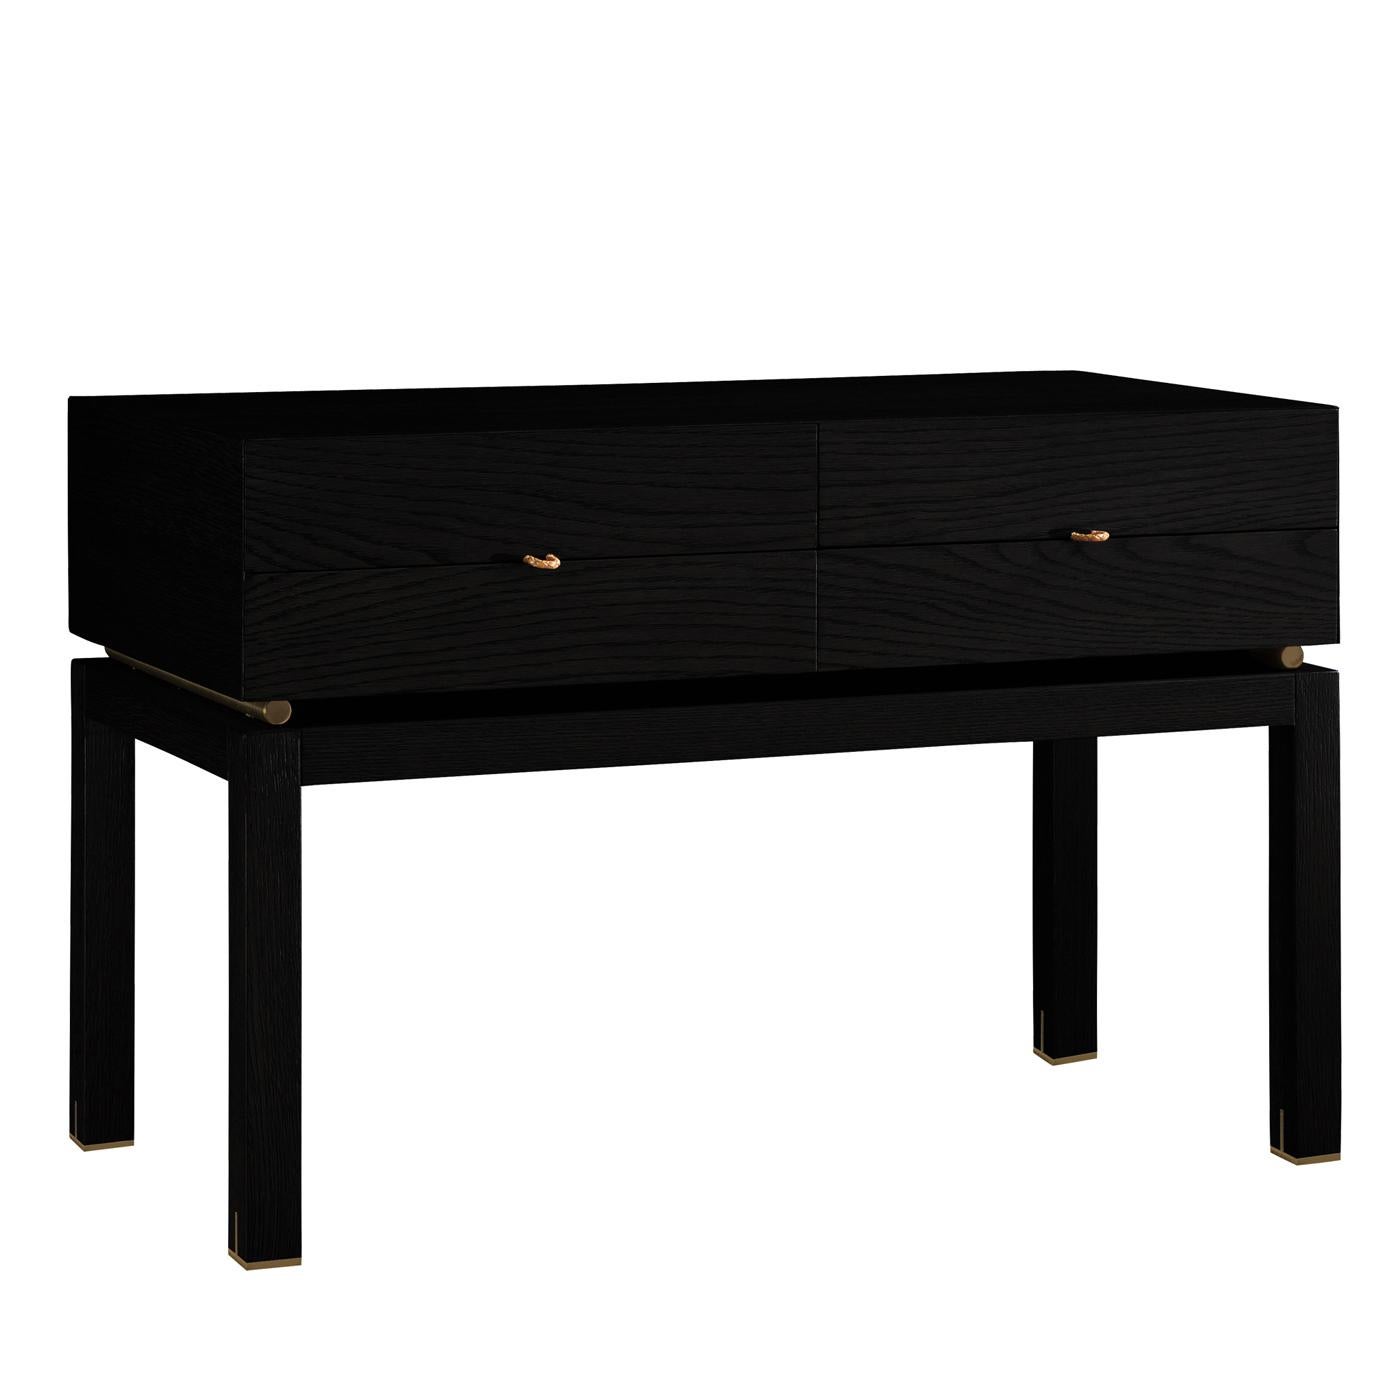 An elegant piece of functional decor, this bedside table boasts a total-black look that will imbue a room with refined sophistication. Exquisitely crafted of lacquered solid durmast wood, its sturdy silhouette resting on robust and thick legs is